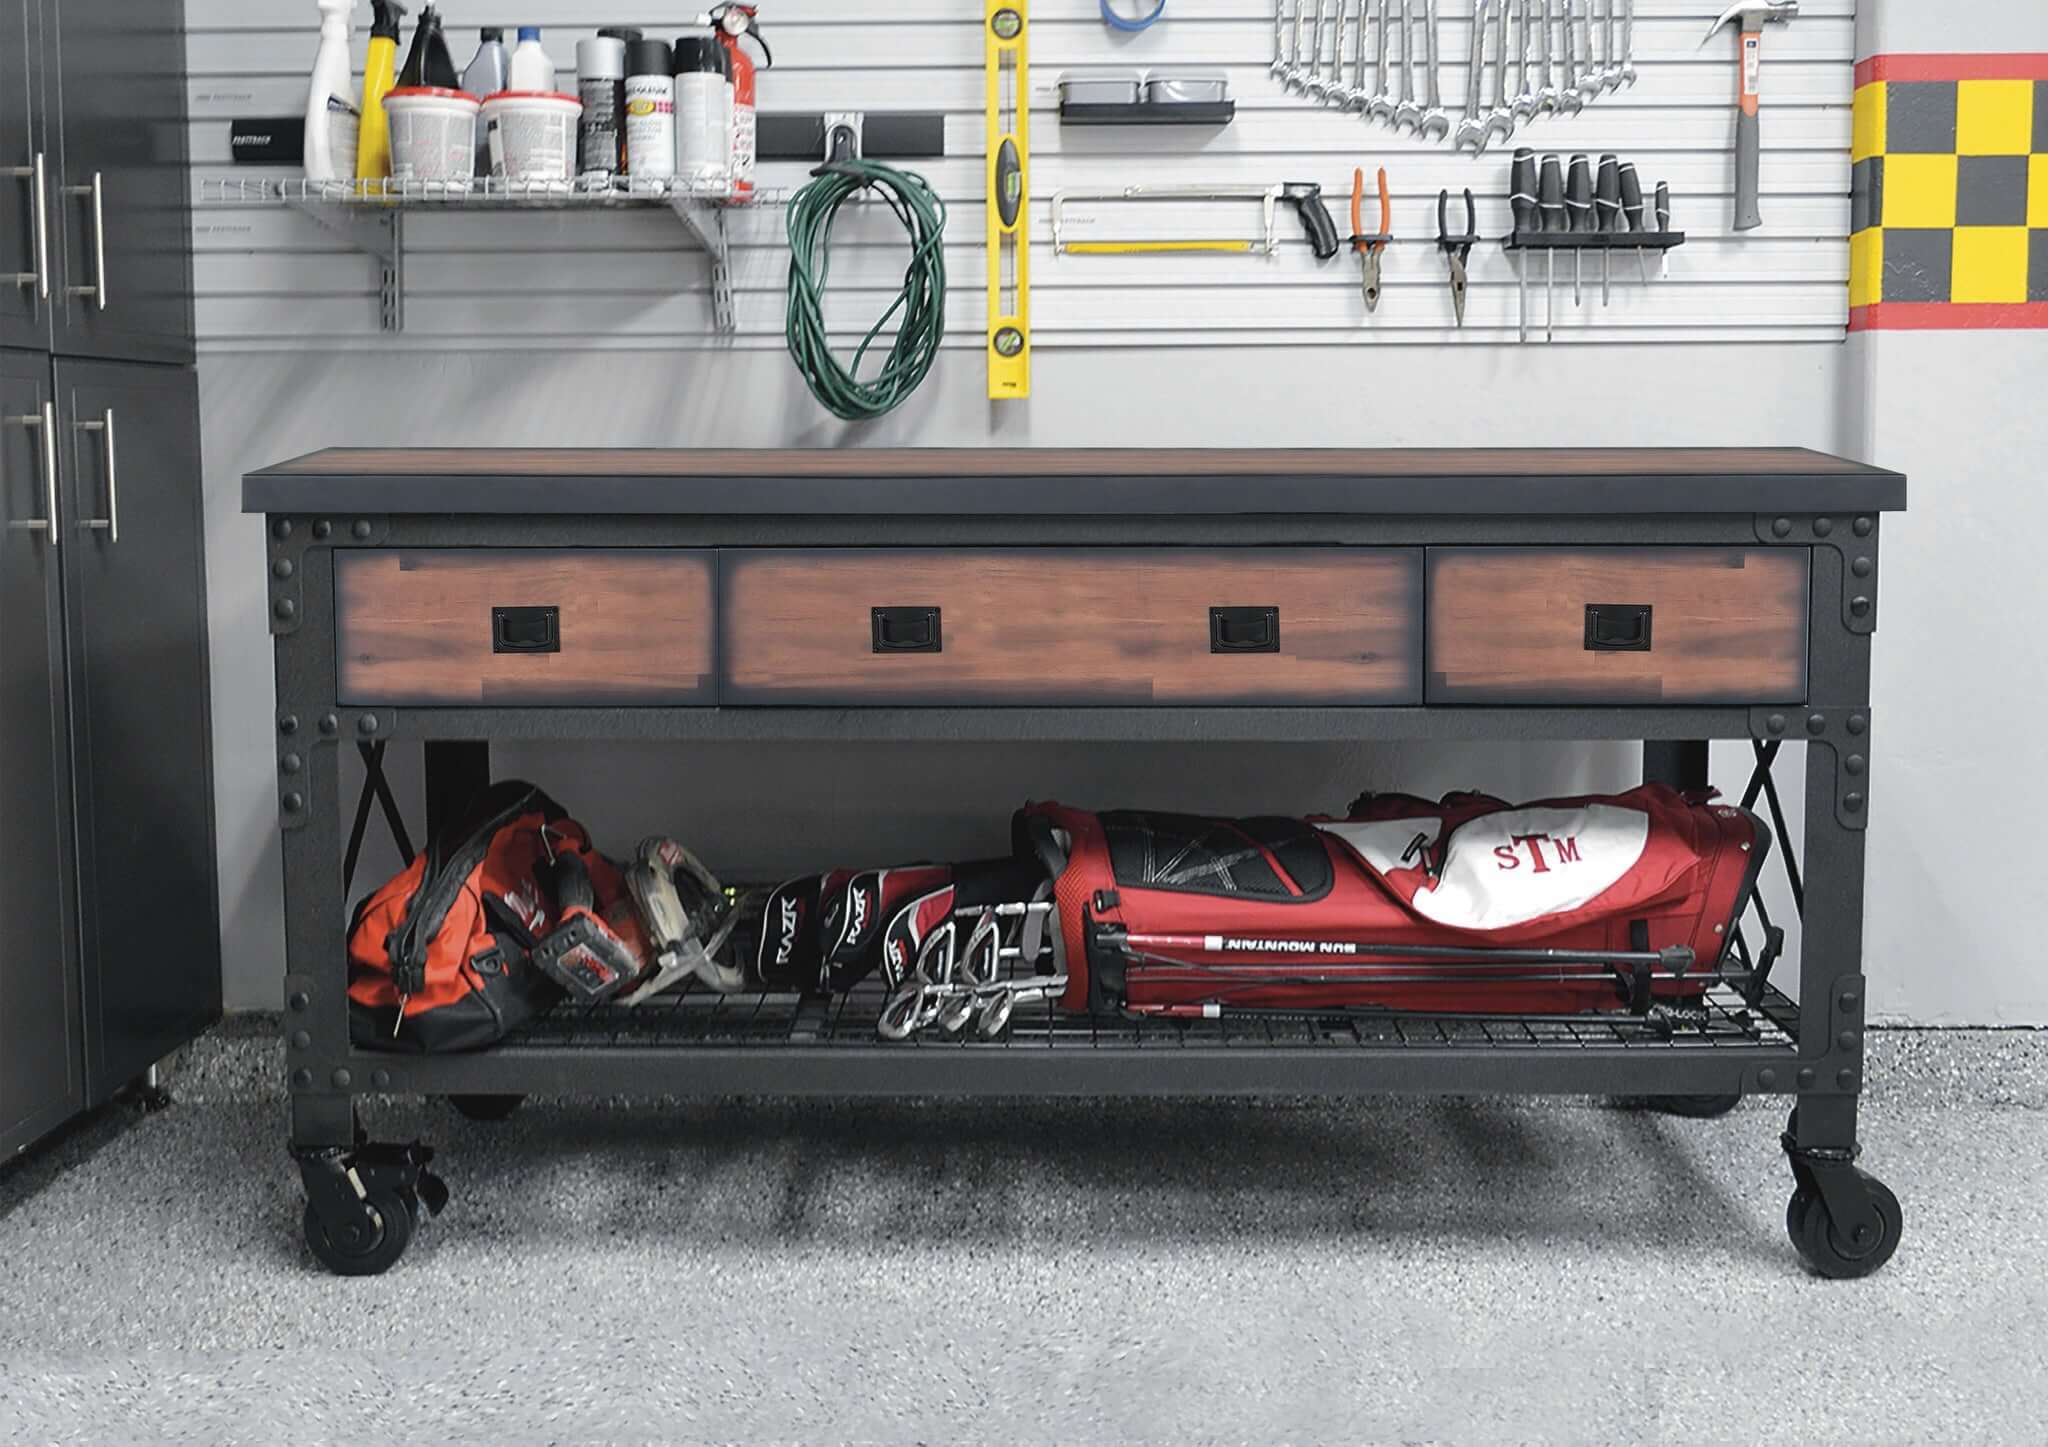 Duramax 72" W x 24" D Rolling Workbench 68001 lifestyle pic in garage with contents